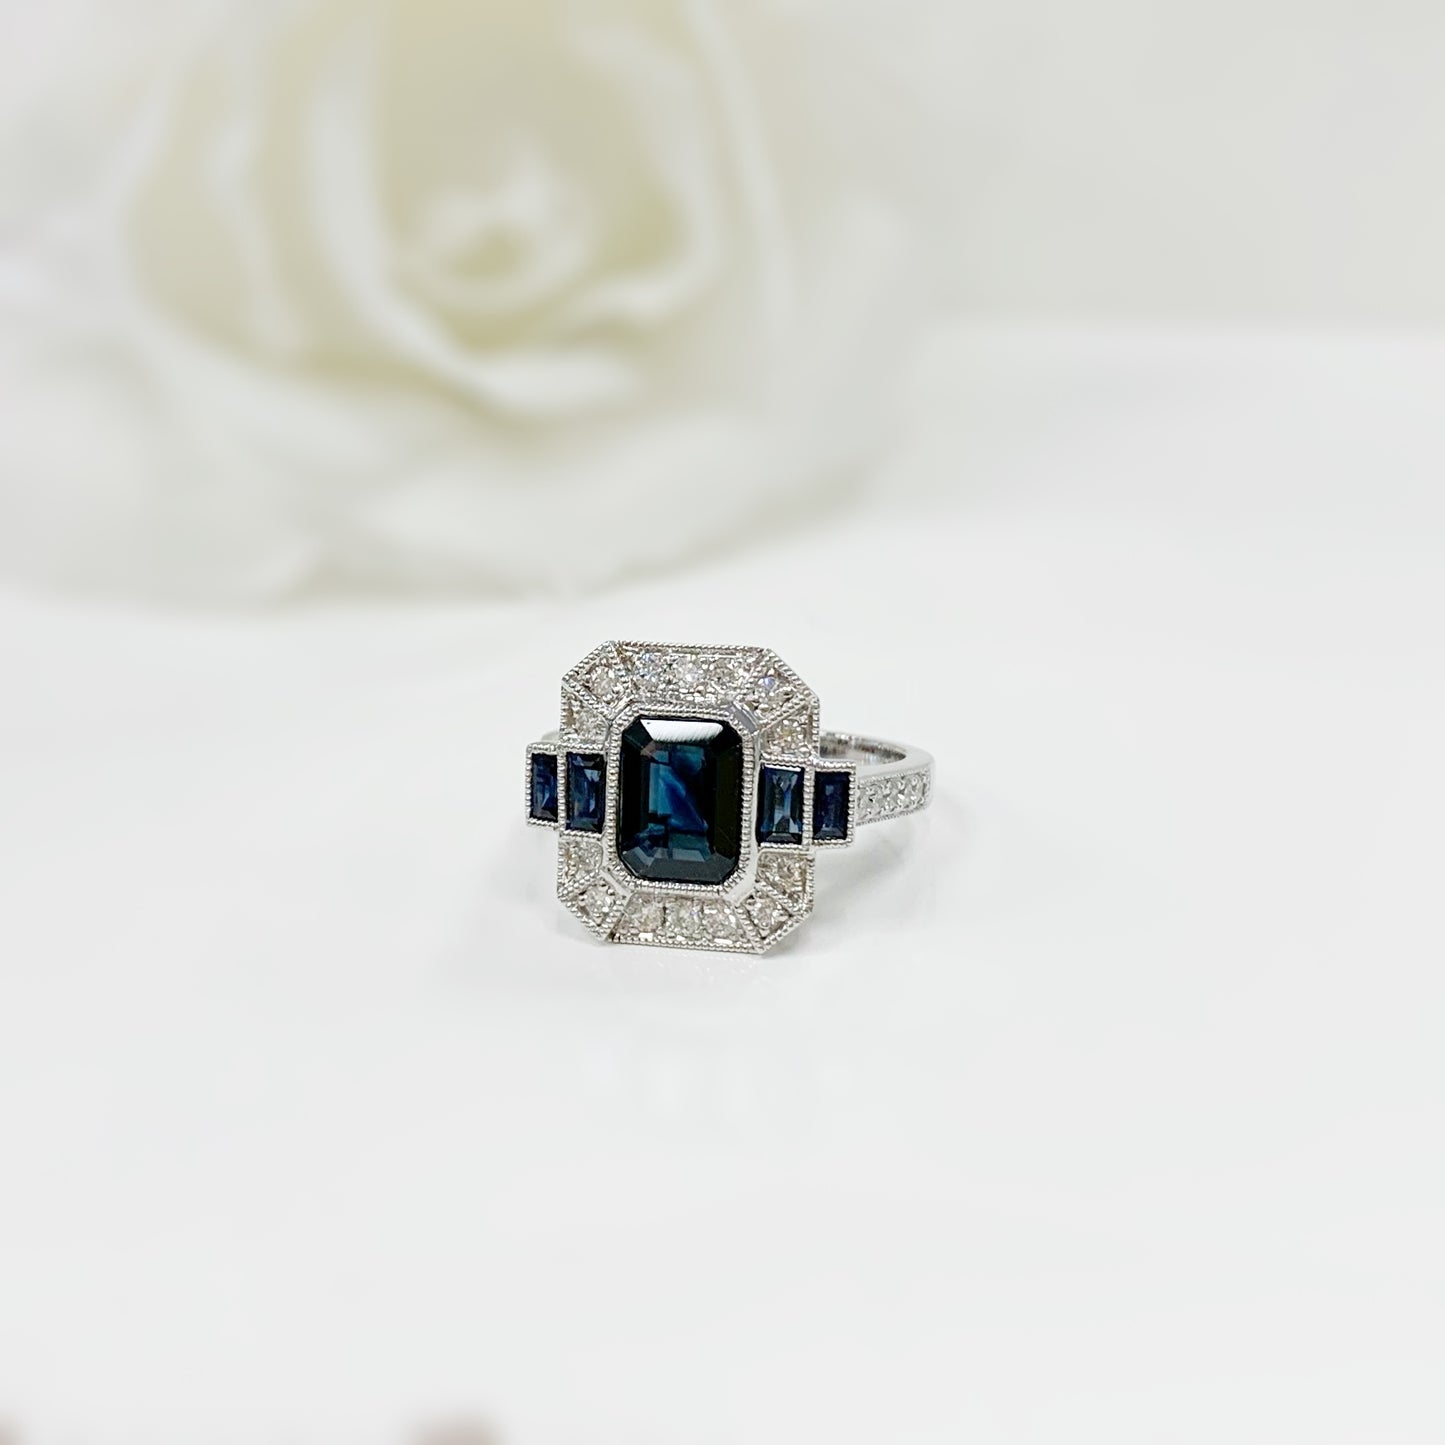 Art Deco Reproduction Magnificent 18ct White Gold Sapphire and Diamond Cocktail Ring - SIZE M 1/2